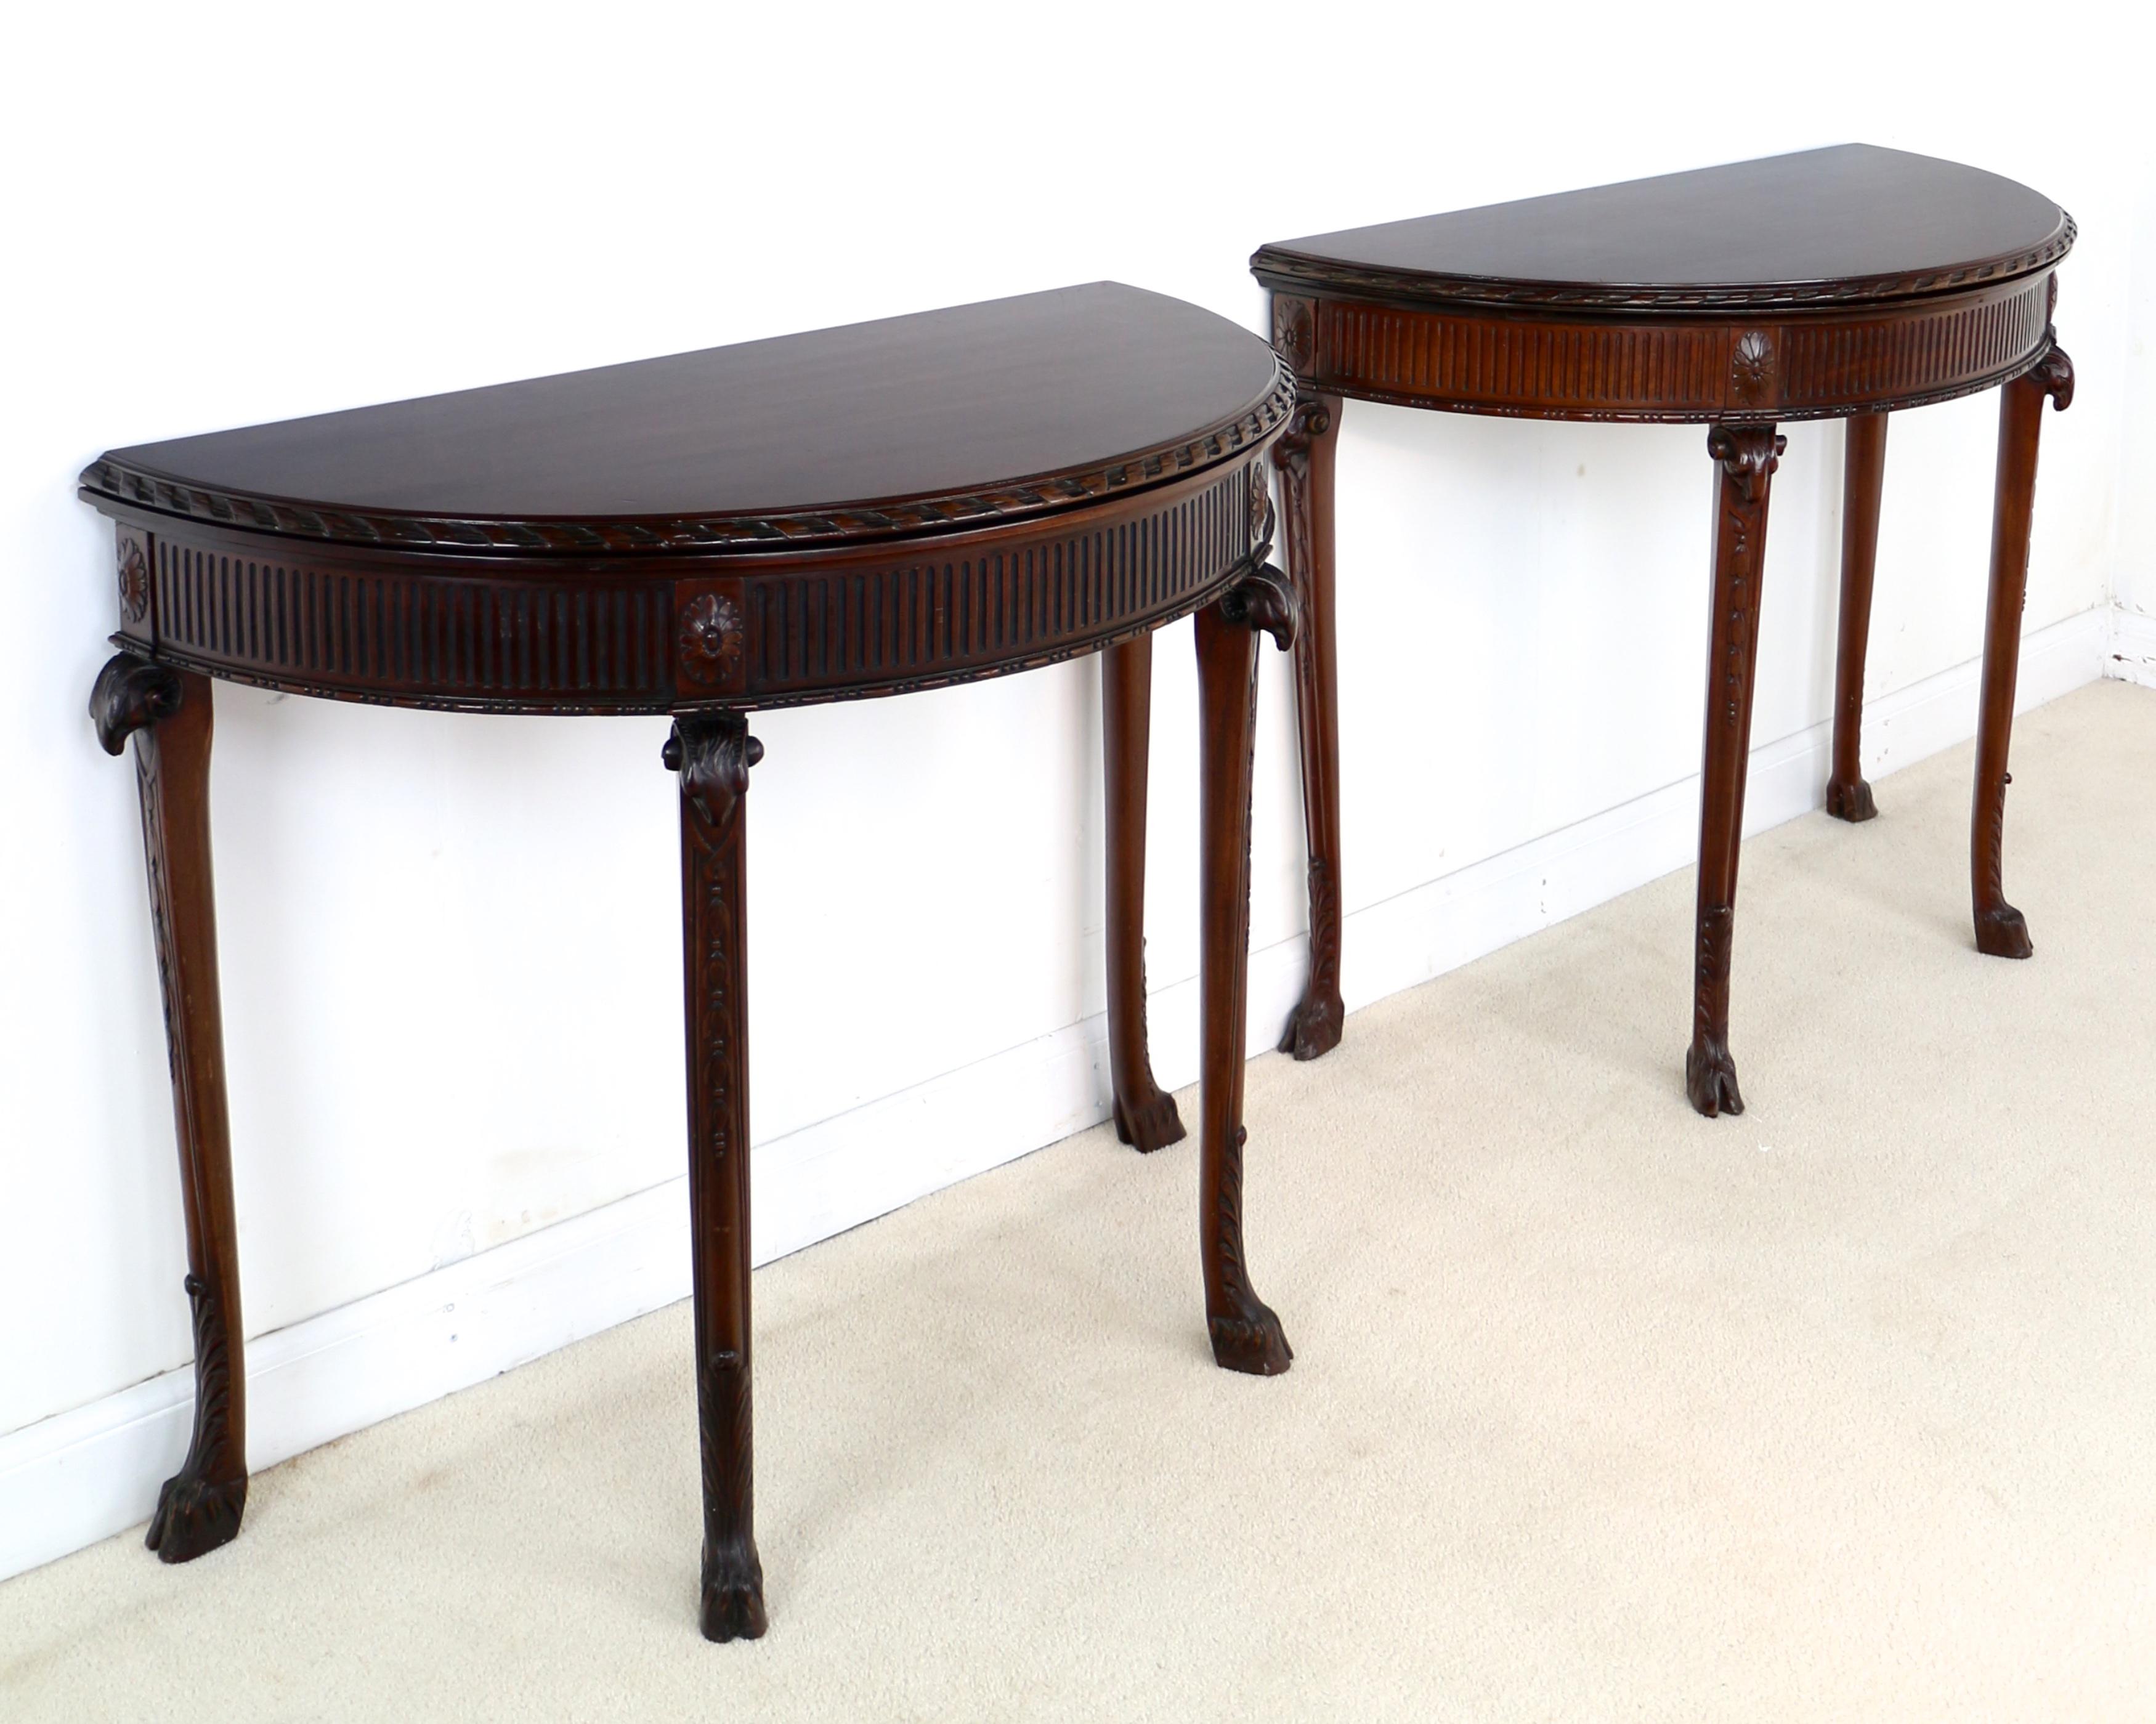 Adam Style Pair of George III Neoclassical Style Mahogany Demi-Lune Card Tables, circa 1900